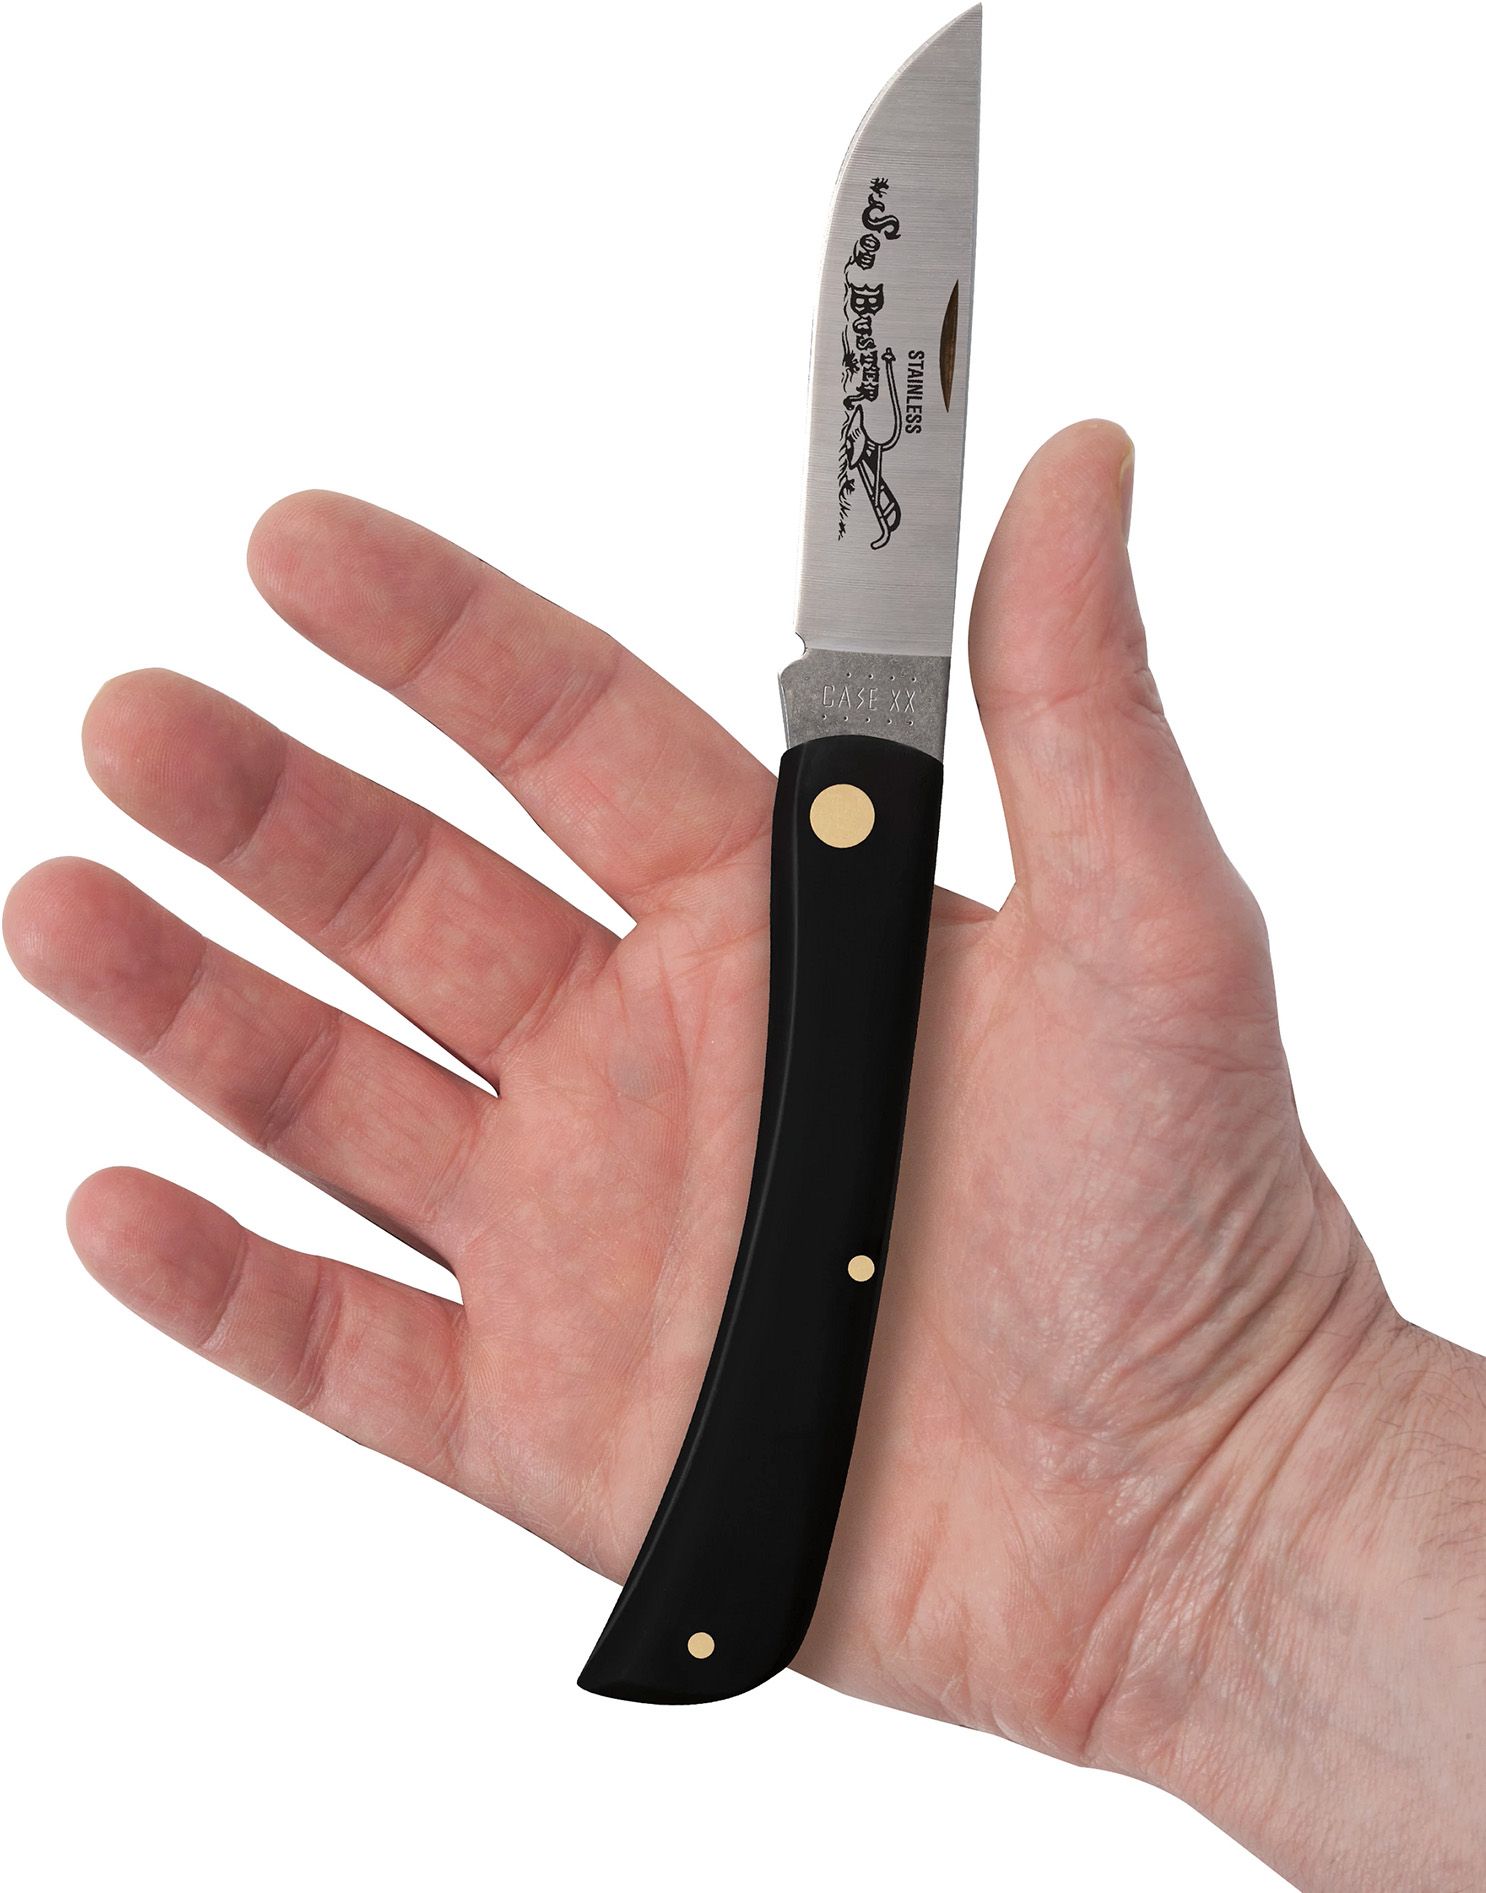 Case Sodbuster Pocket Knife 4.625 Closed, Jet-Black Synthetic Handle (2138  SS) - KnifeCenter - 00092